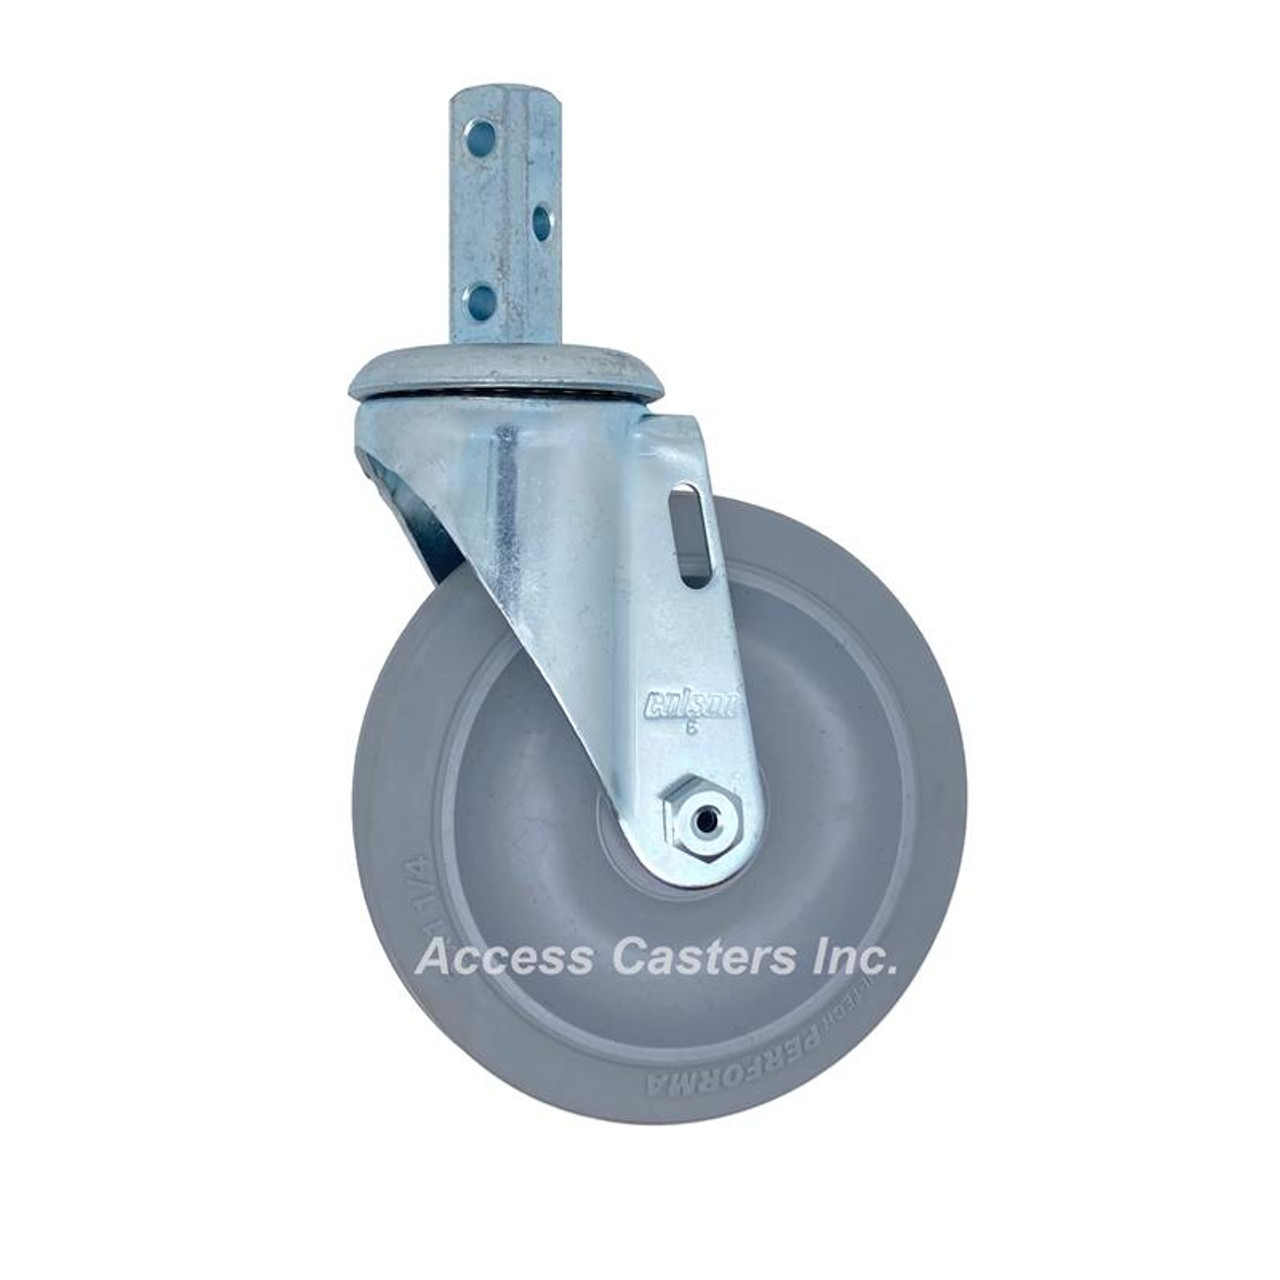 2.05270.445 Colson 5" Square Stem Swivel Caster with Performa Rubber Wheel